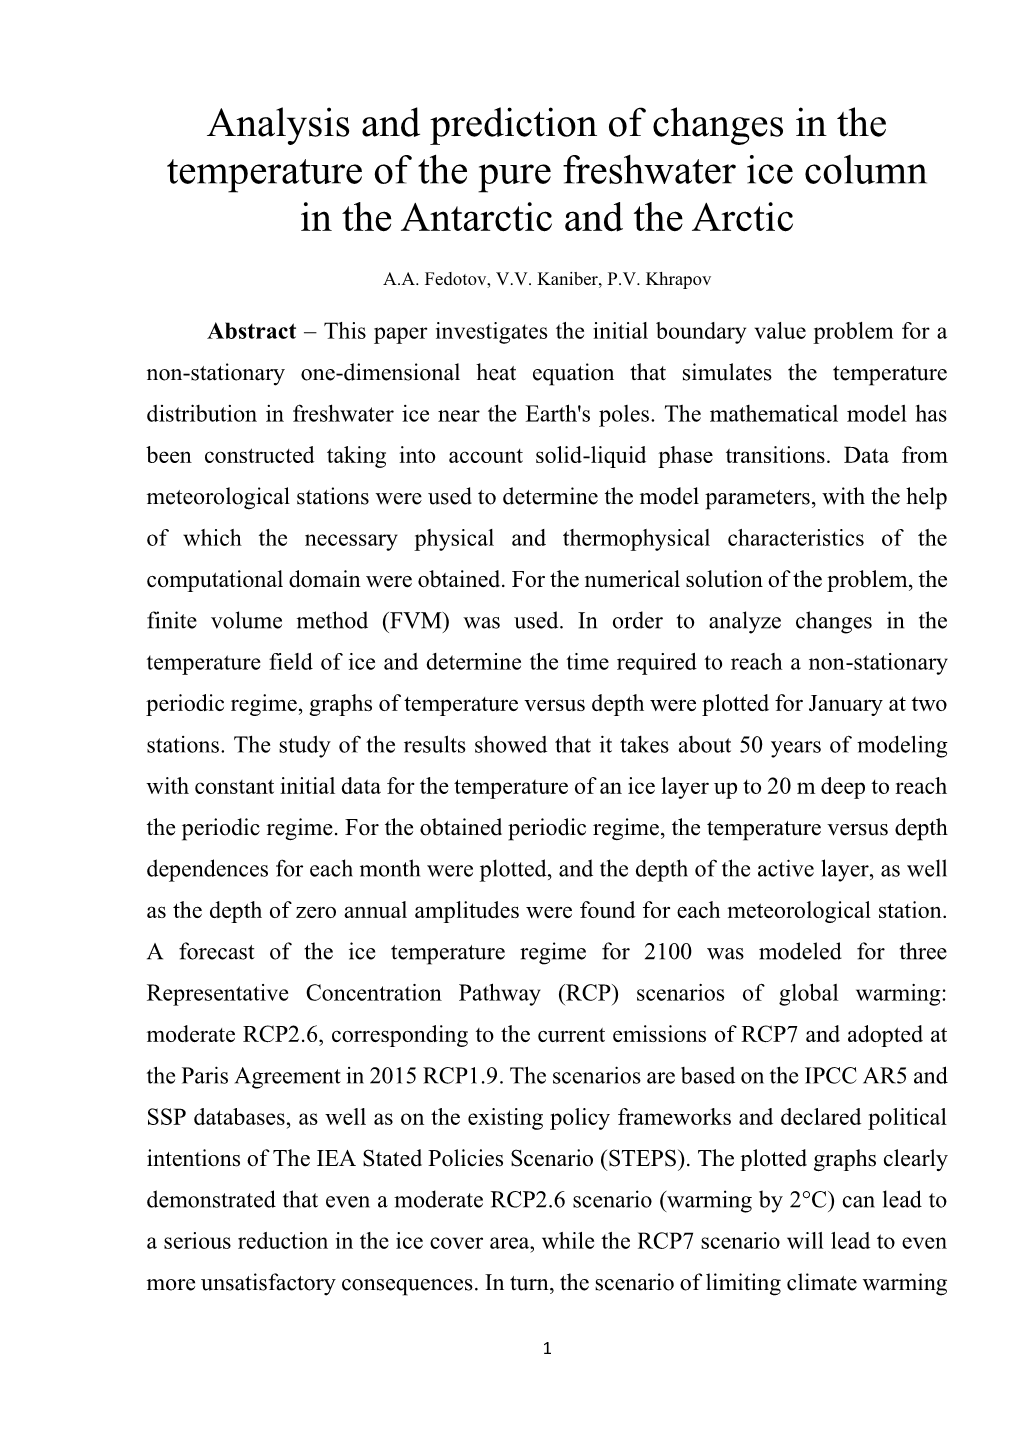 Analysis and Prediction of Changes in the Temperature of the Pure Freshwater Ice Column in the Antarctic and the Arctic